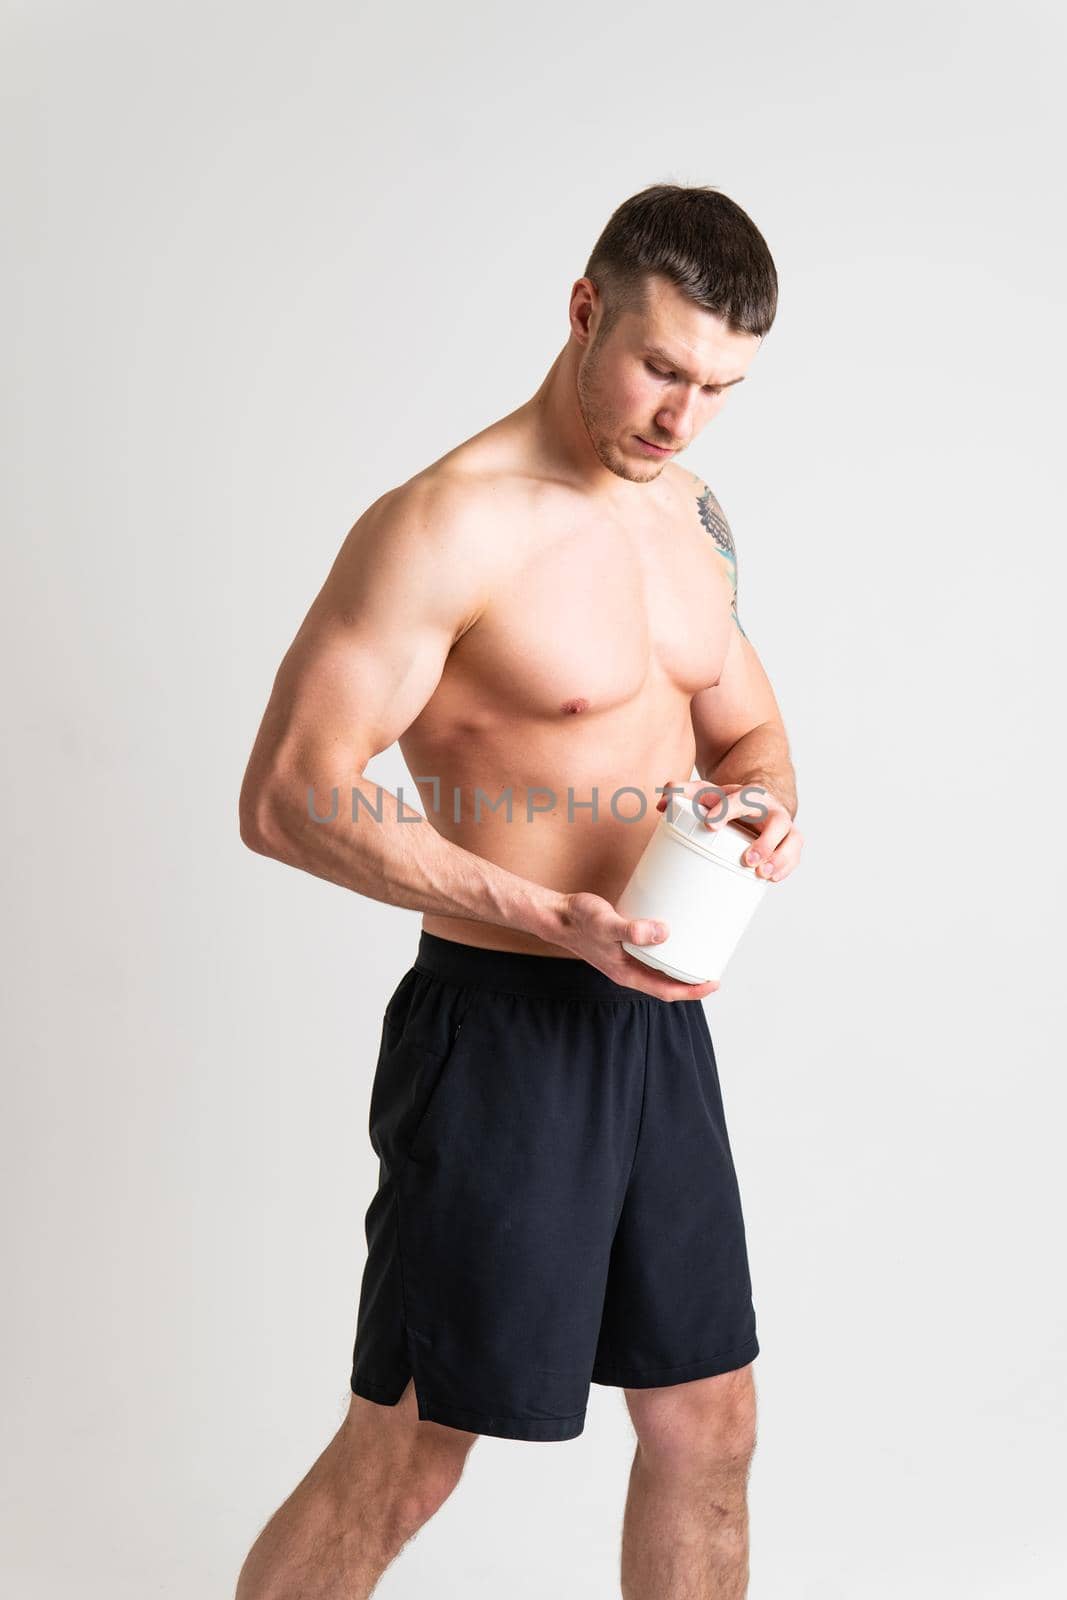 Fitness protein jars white on white background bodybuilder powder strong high injury, spine health adult, hand chronic. Hold neck care, back suffer attractive by 89167702191